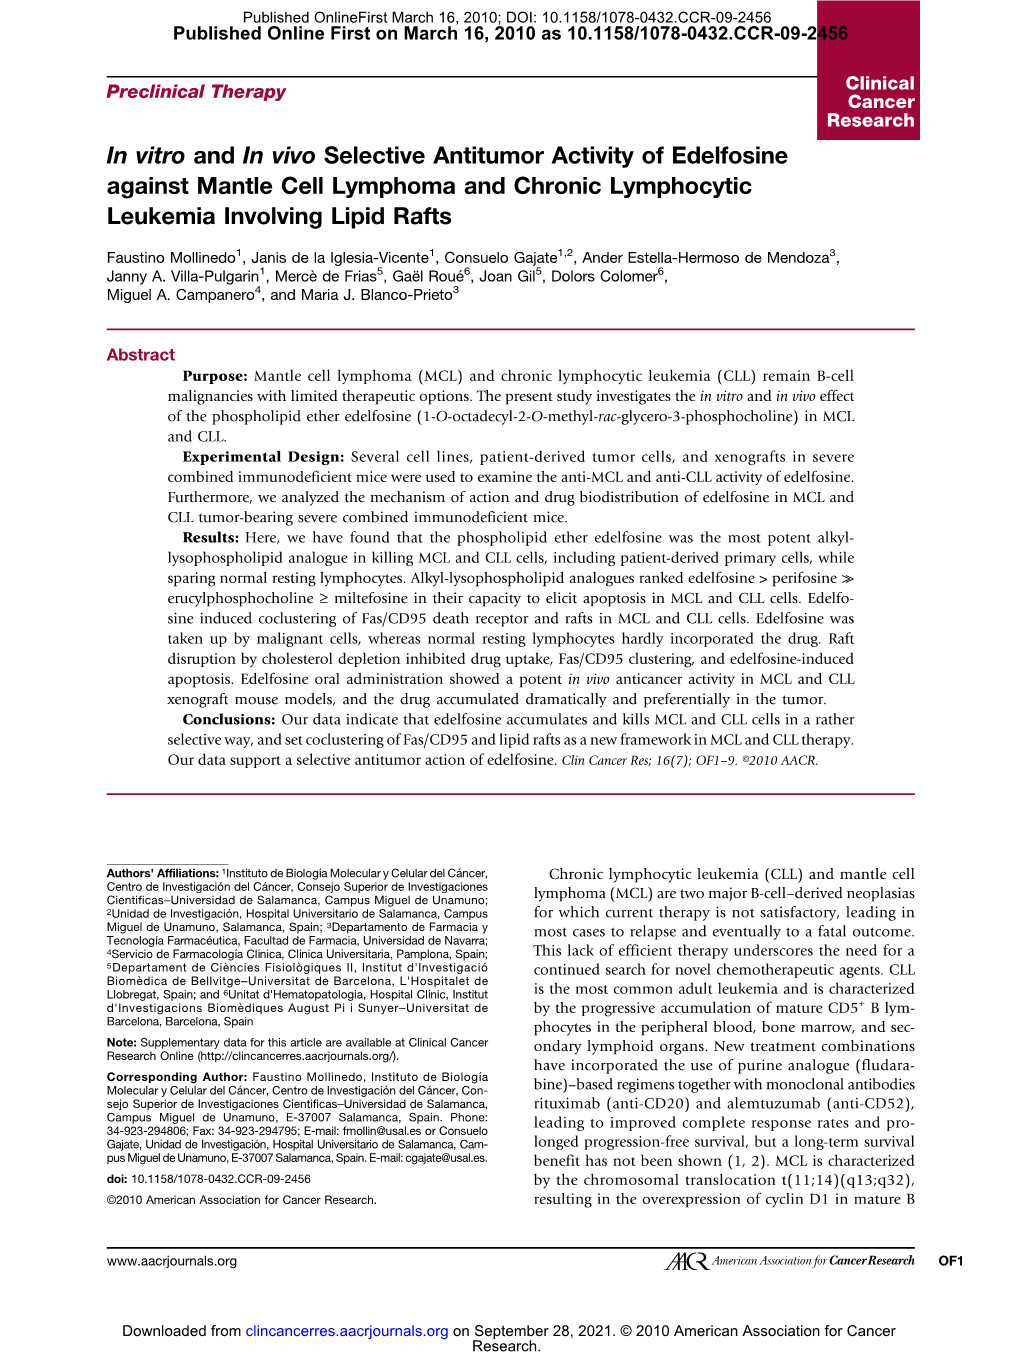 In Vitro and in Vivo Selective Antitumor Activity of Edelfosine Against Mantle Cell Lymphoma and Chronic Lymphocytic Leukemia Involving Lipid Rafts